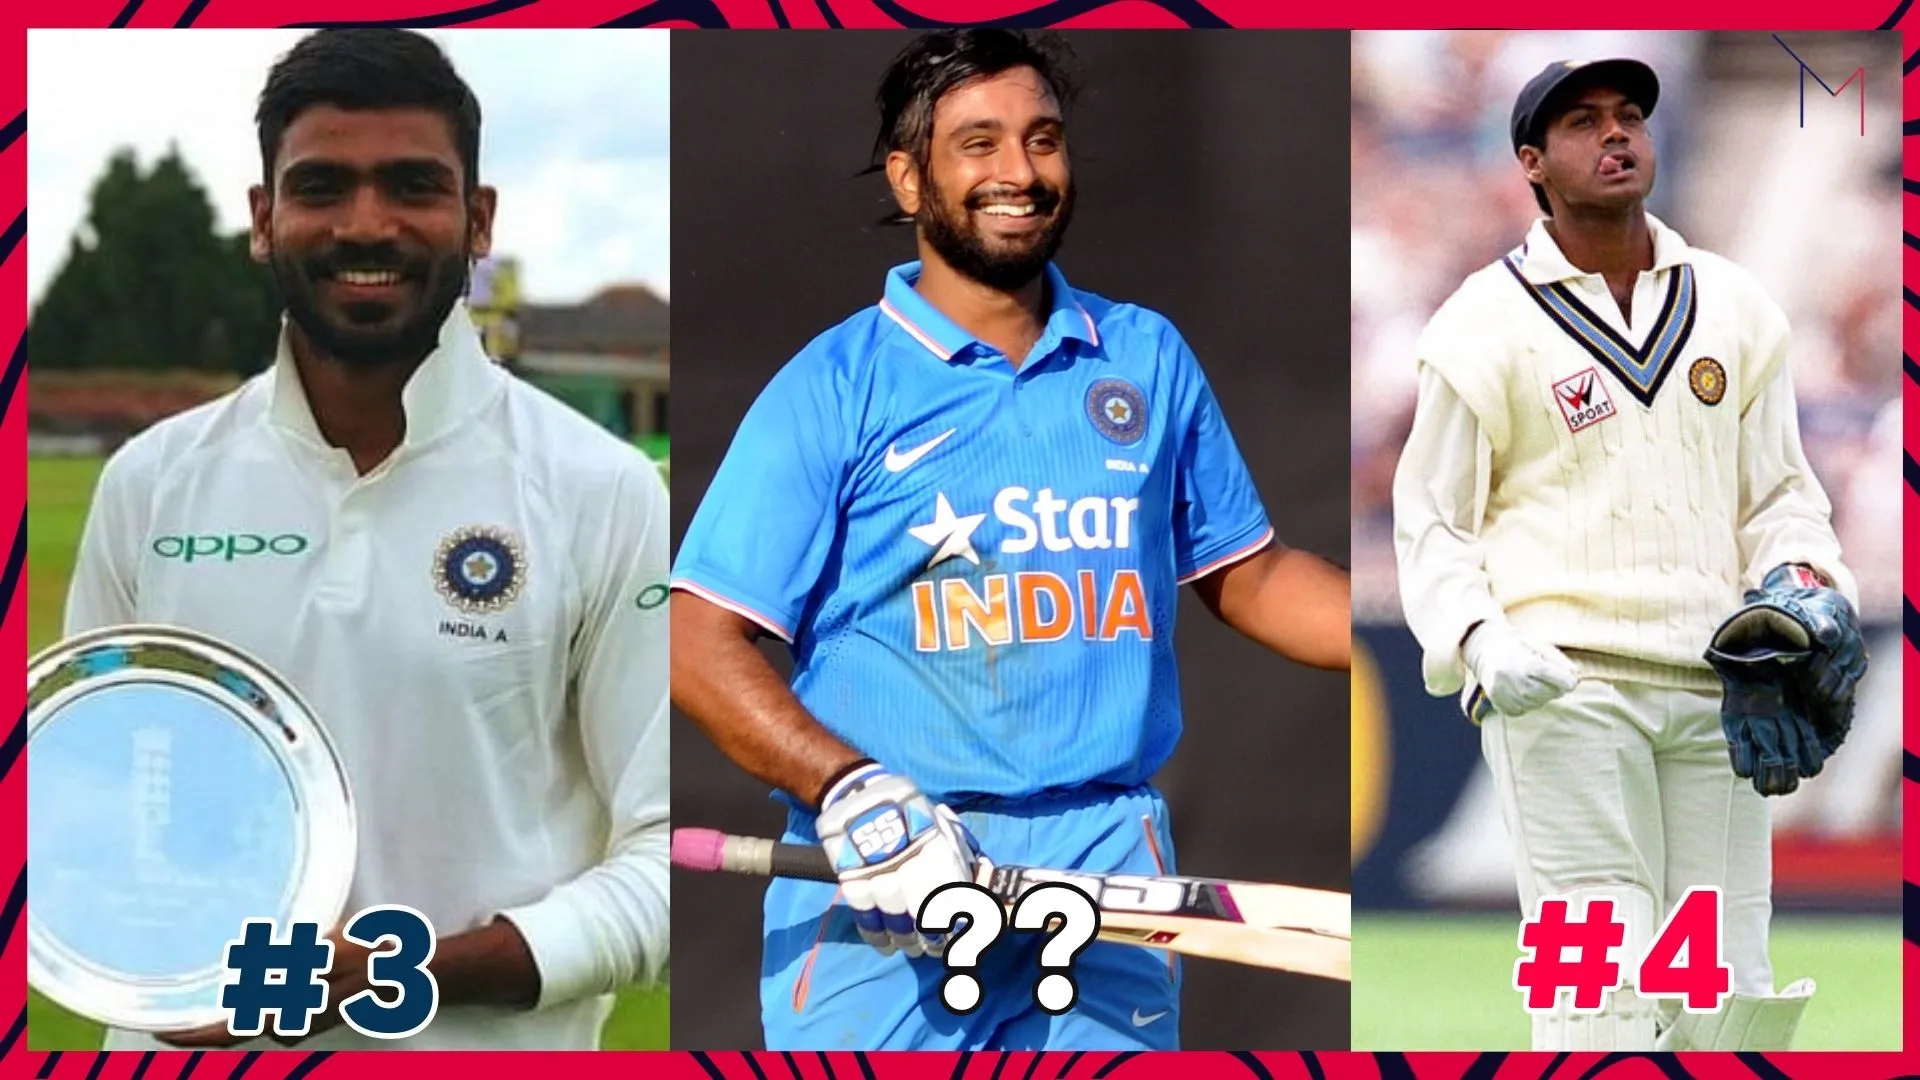 Top 5 most popular cricketers from Andhra Pradesh - Famous cricket players from Andhra Pradesh